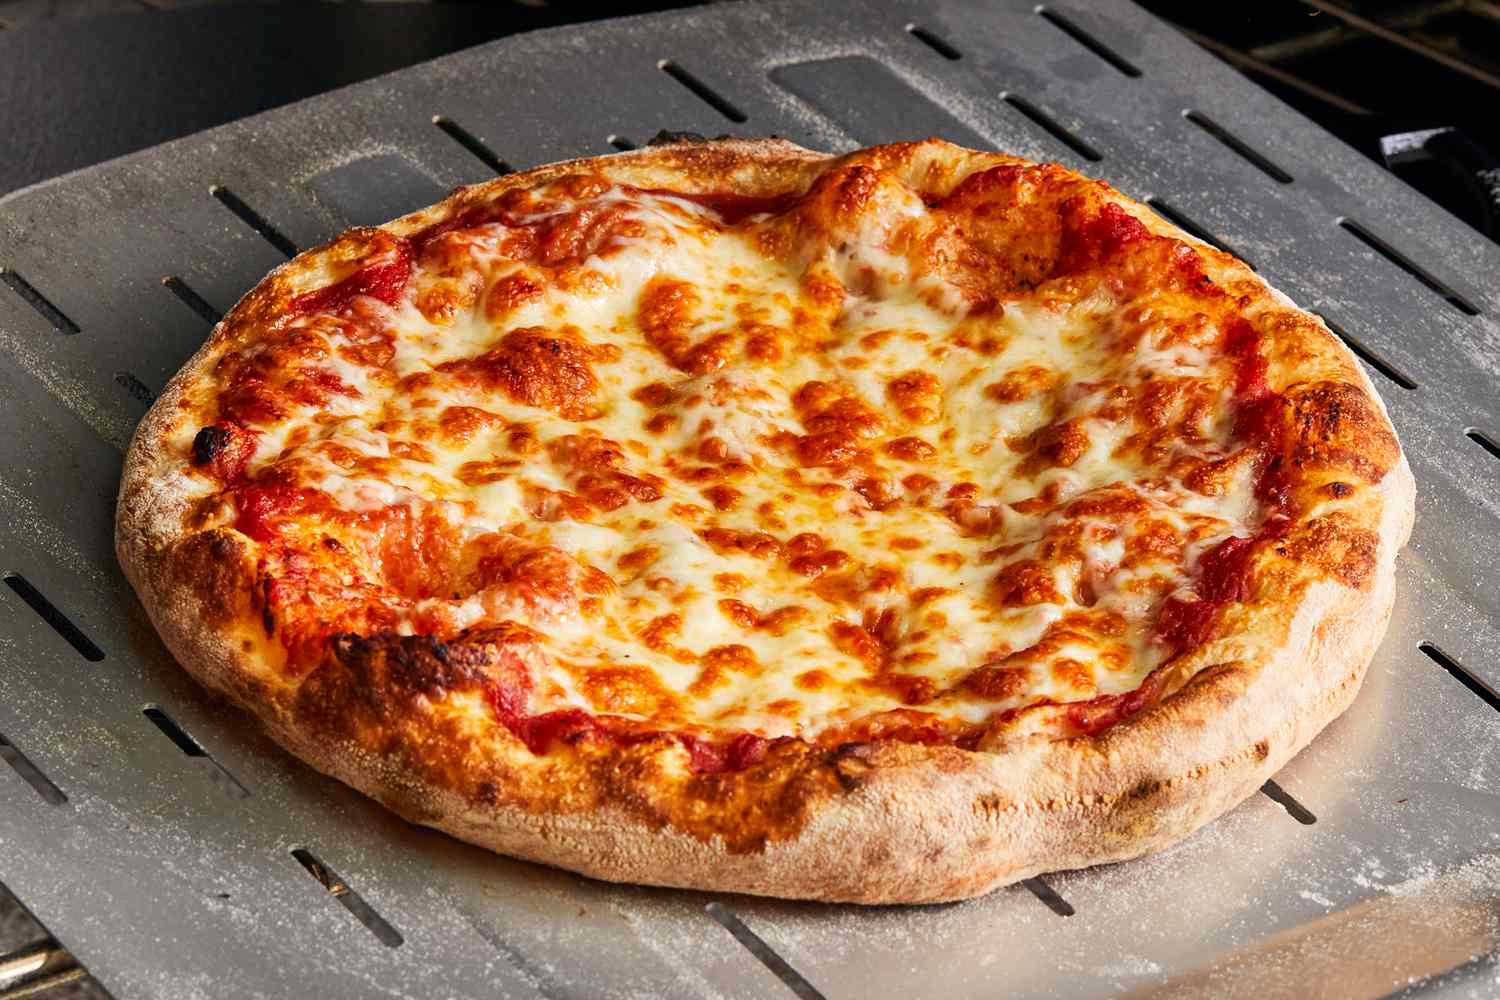 10 Inch Pizza: Perfectly Portioned Pleasure